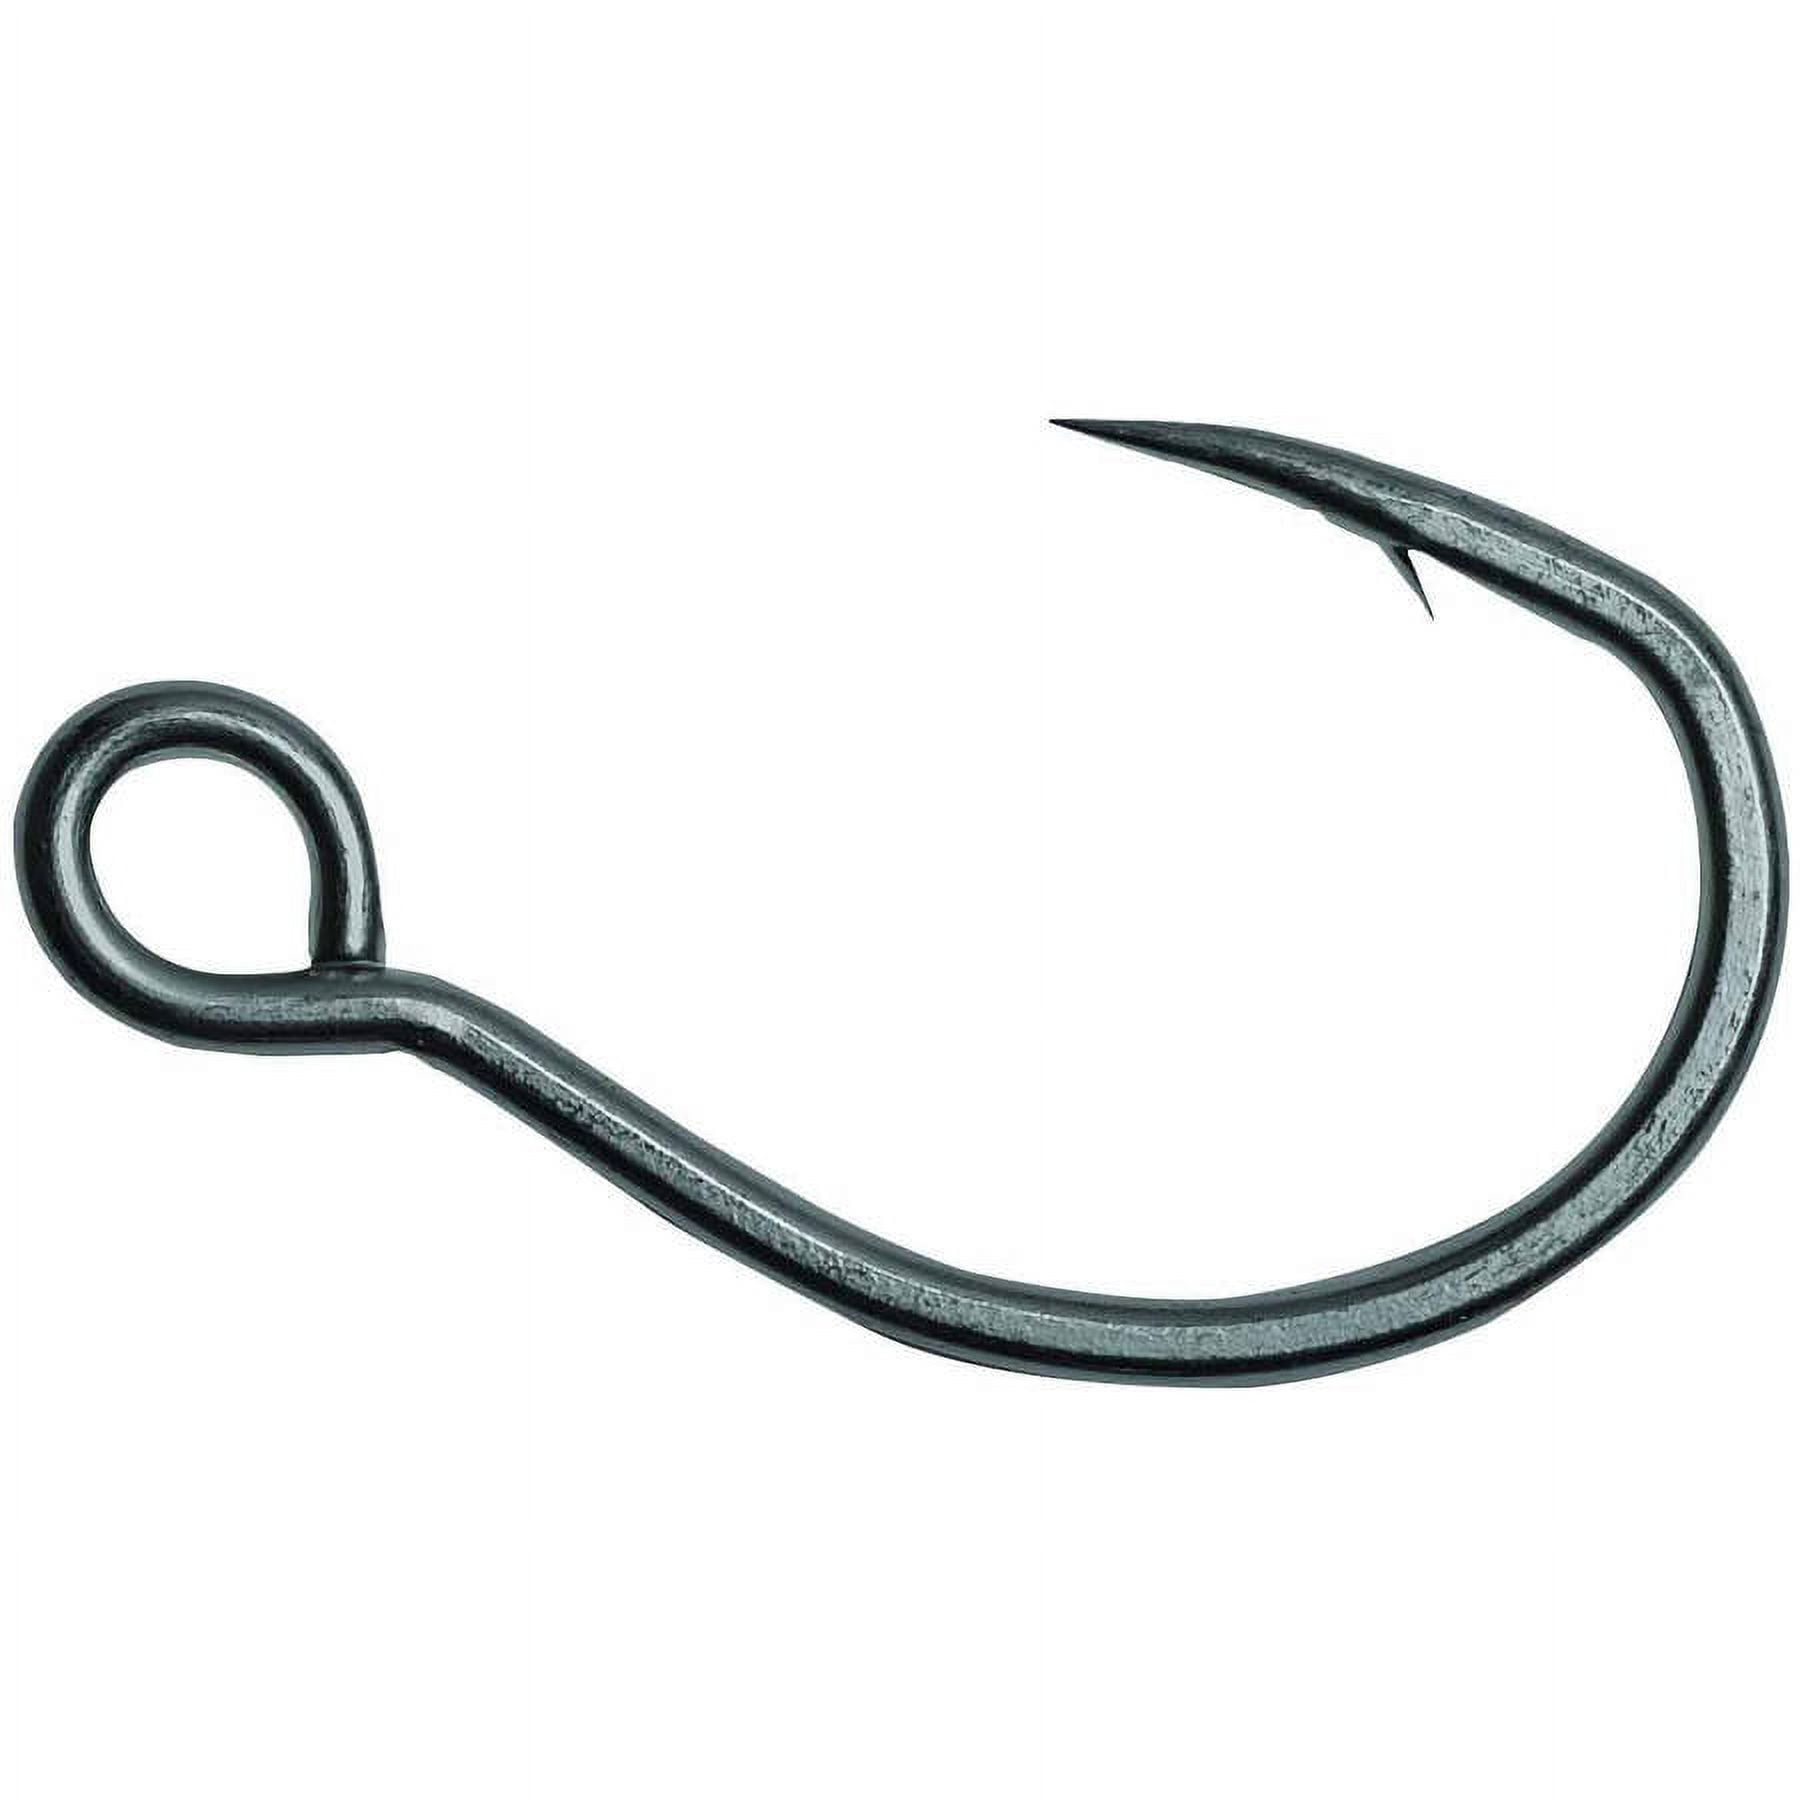 Owner 4102-139 Single Replacement Hook Size 3/0 Needle Point 